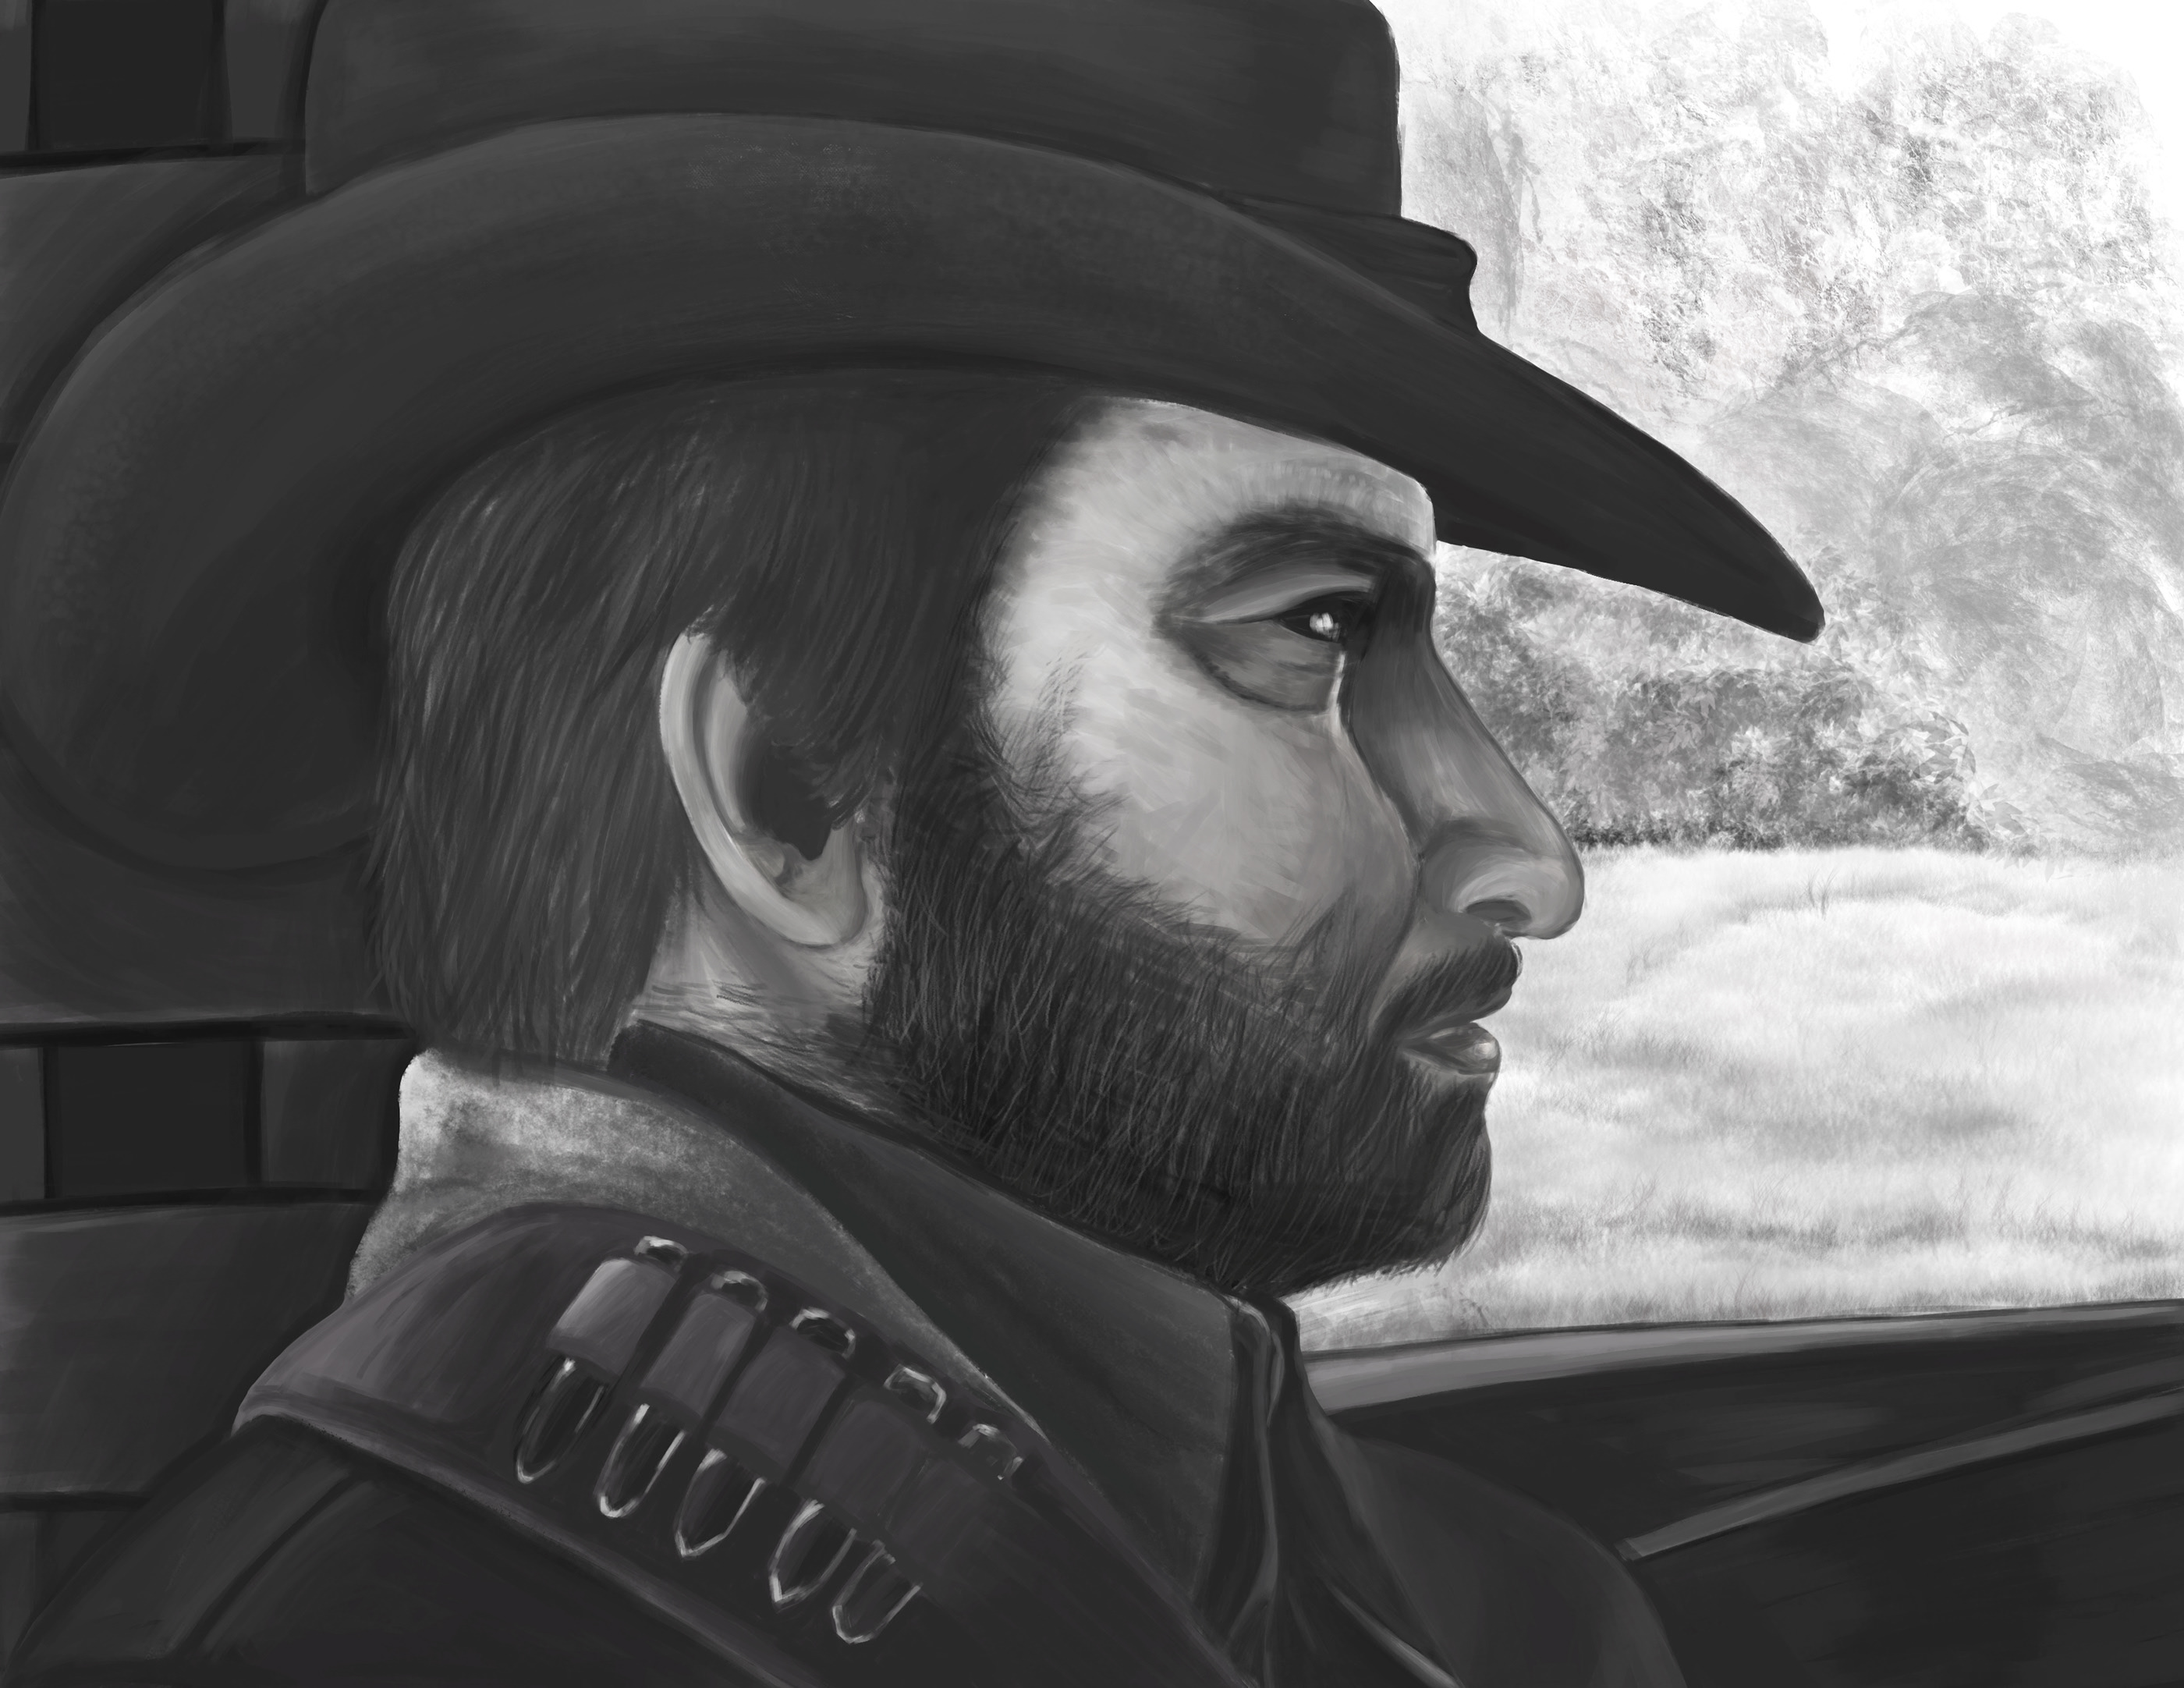 Hi there, this is my fanart for Arthur Morgan in Red Dead Redemption 2